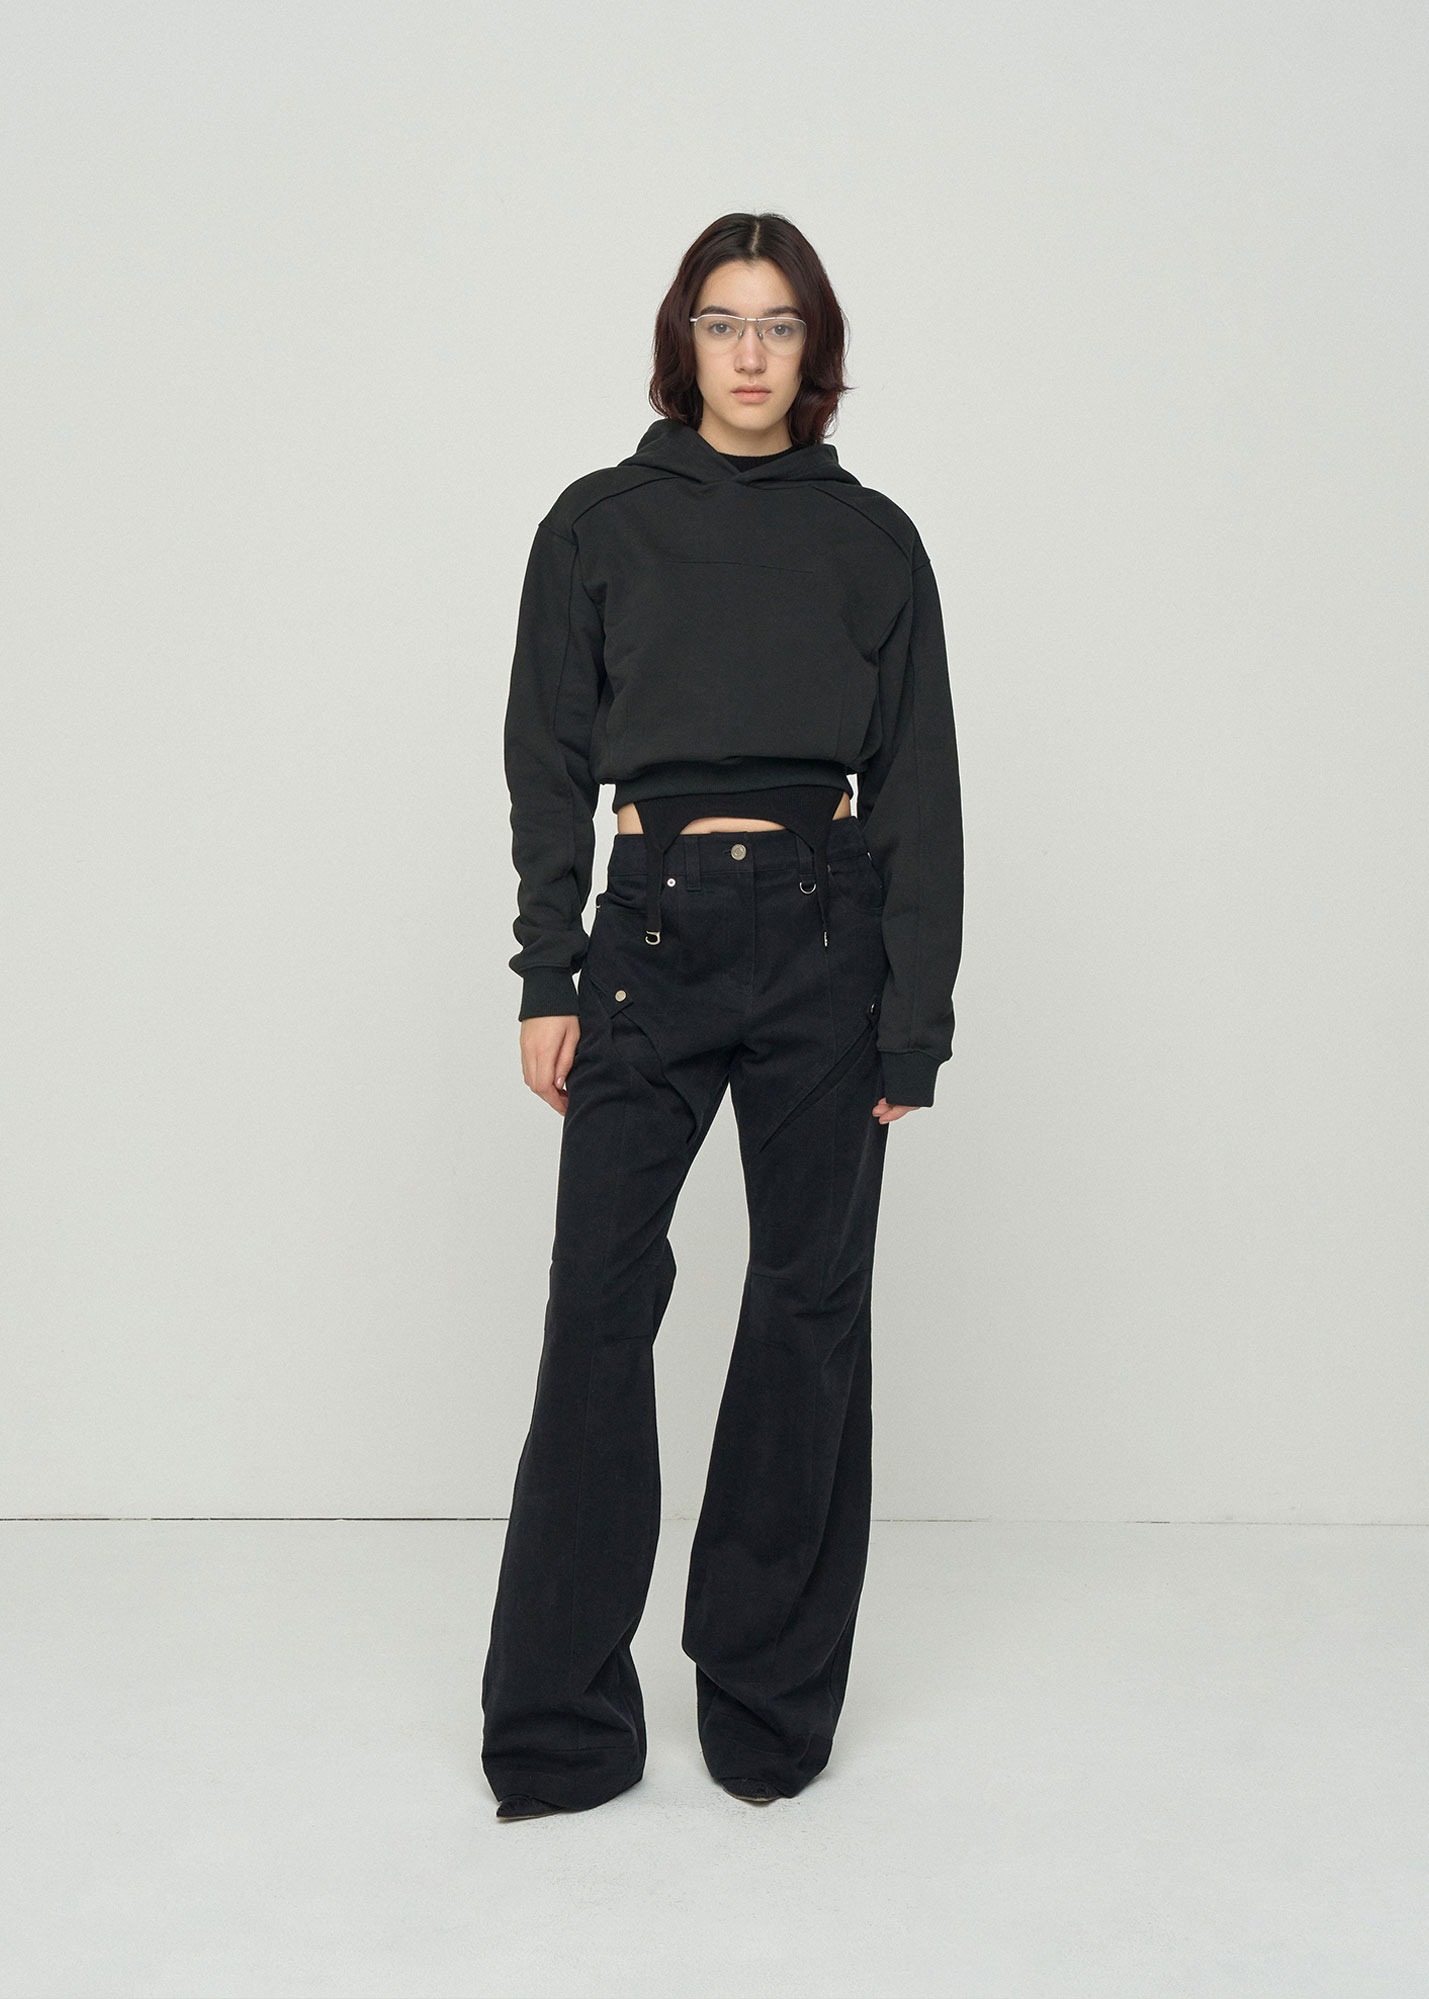 CUT-OUT BOOTSCUT TROUSERS BLACK